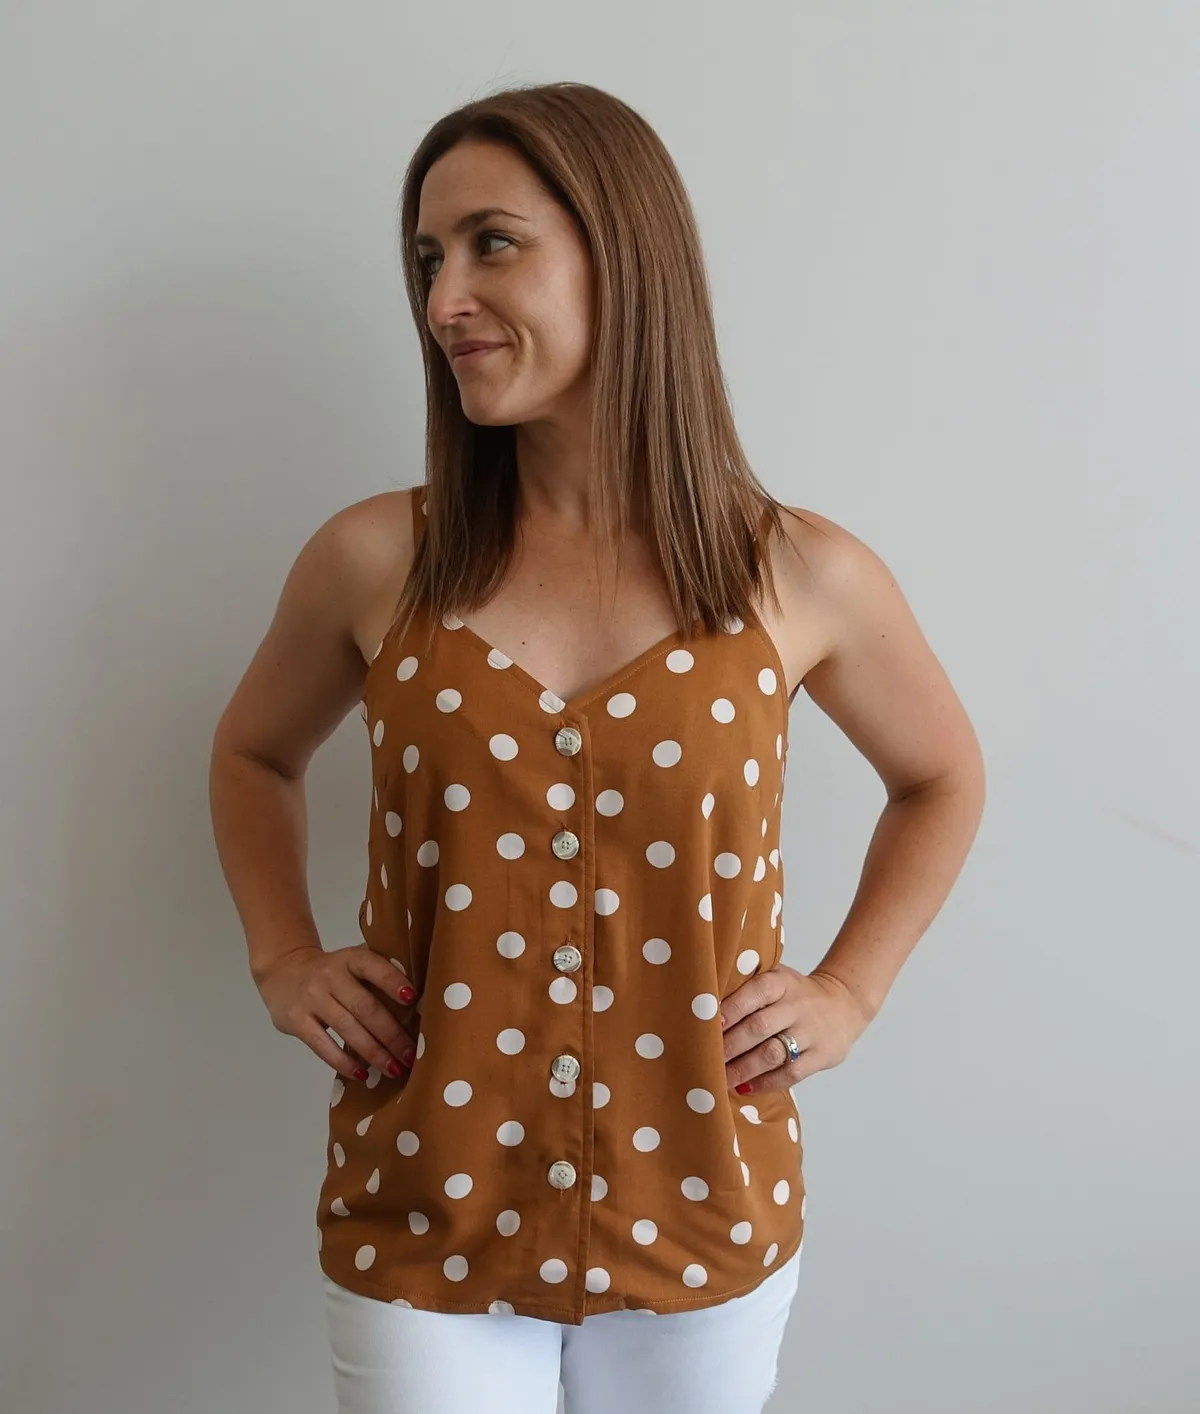 Portia camisole sewing pattern